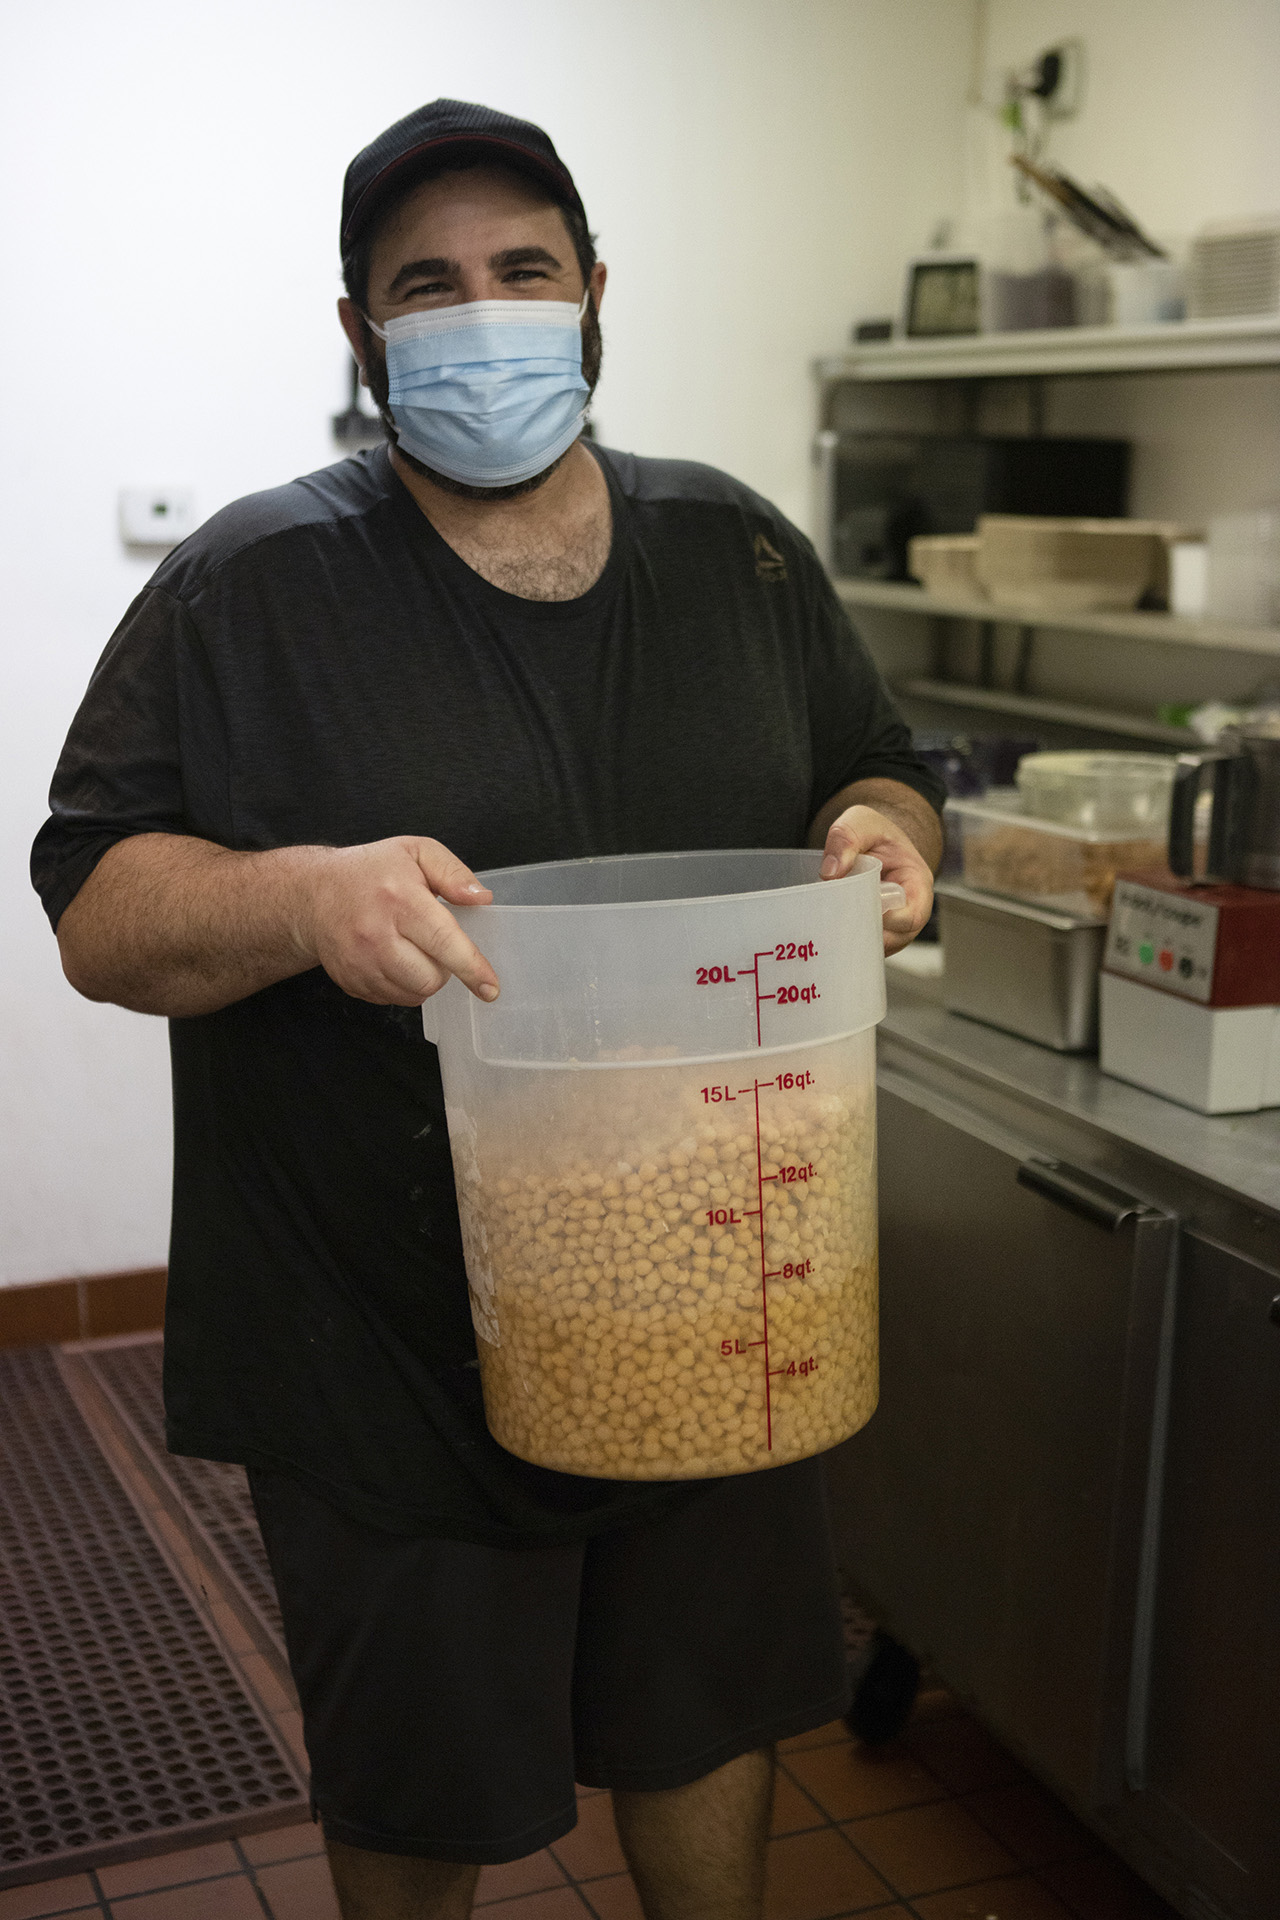 In the Hummus Labs kitchen, chef Joseph Badaro is wearing a black shirt, black hat and a light blue mask. Chef is holding a large plastic container filled with garbanzo beans. 